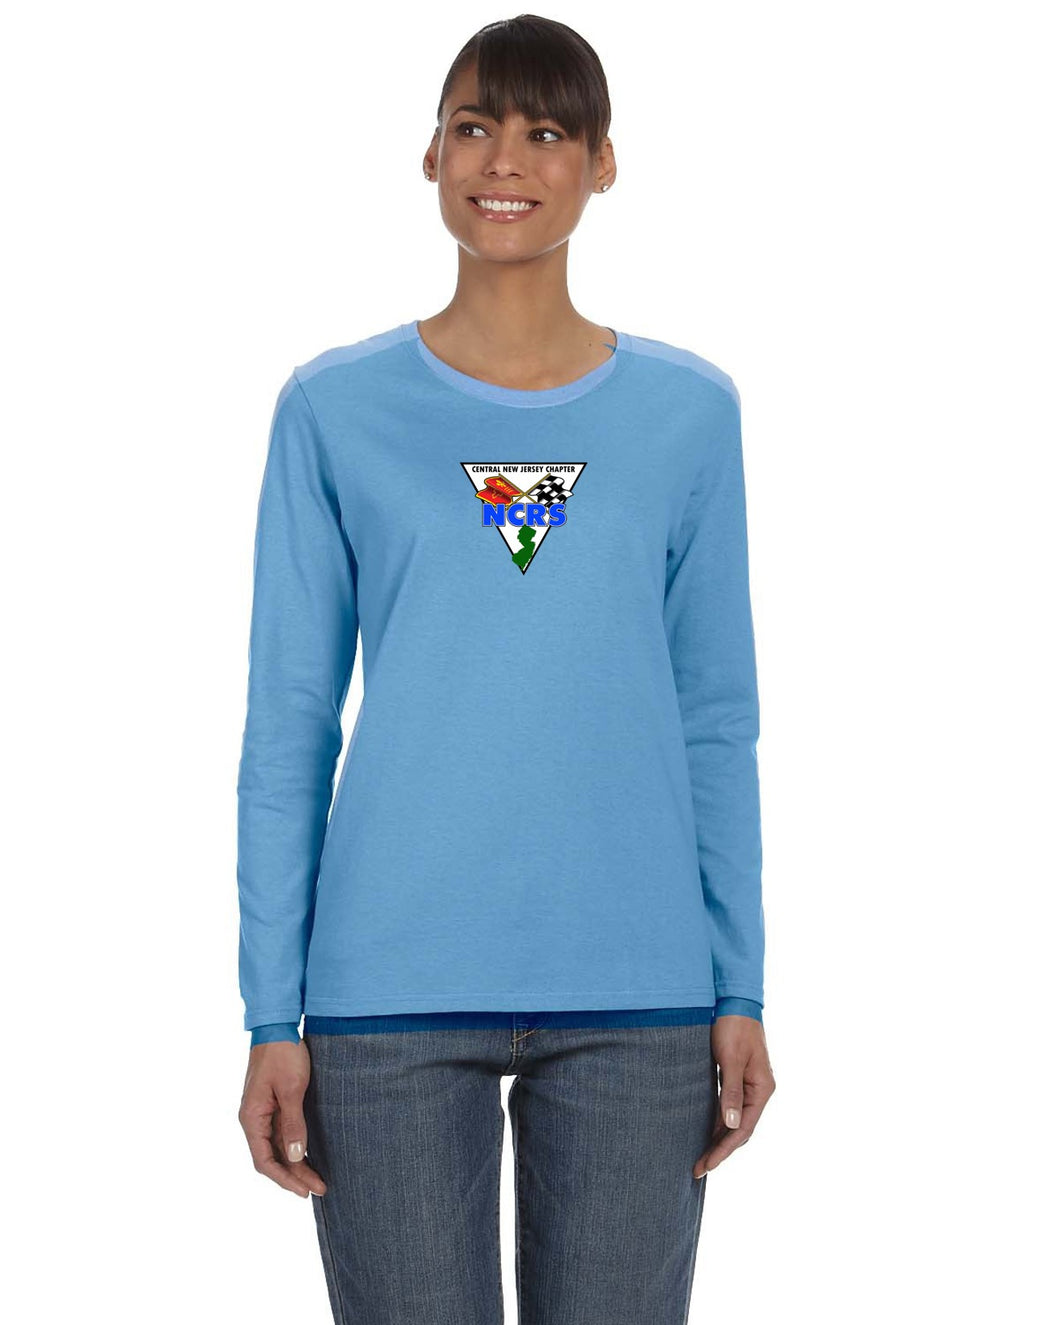 NCRS CENTRAL NEW JERSEY Cotton -LADIES- LONG SLEEVE T-shirt (full logo printed on front)